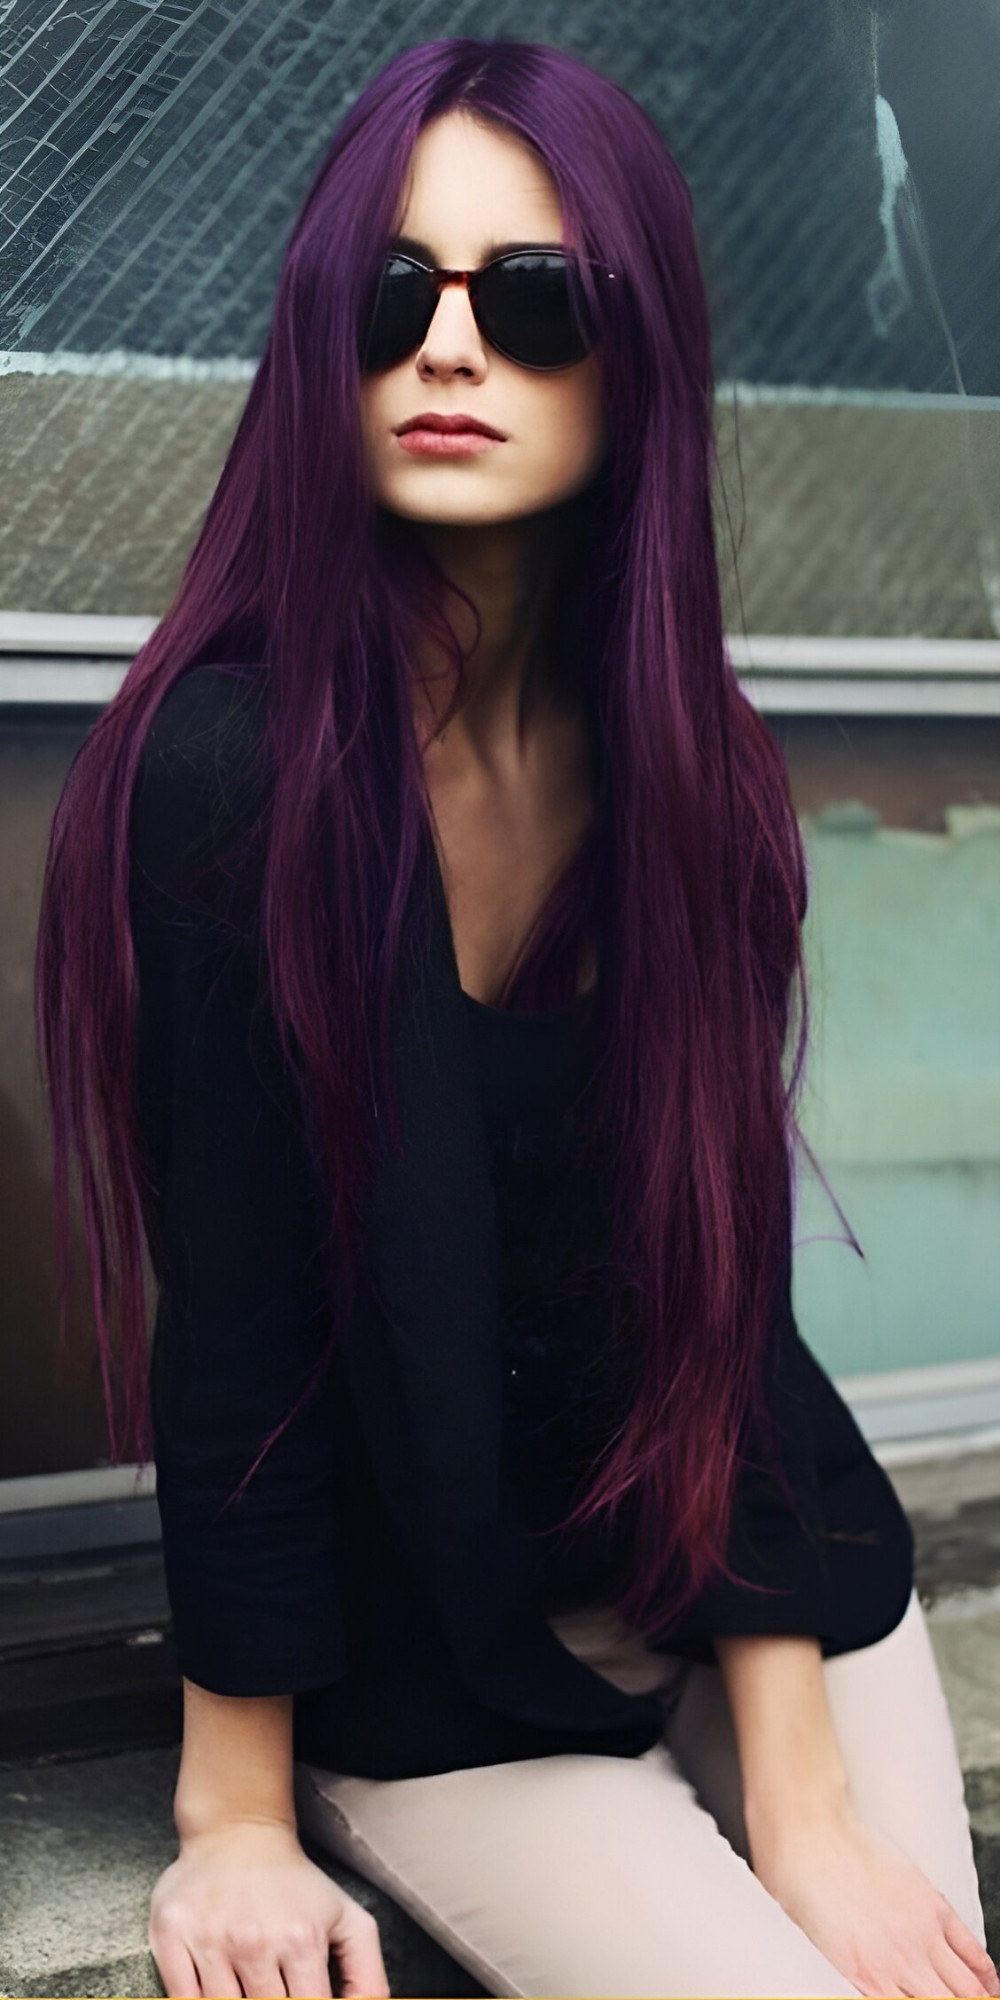 Become A Model With These 27 Gorgeous Plum Hair Color Ideas - 209